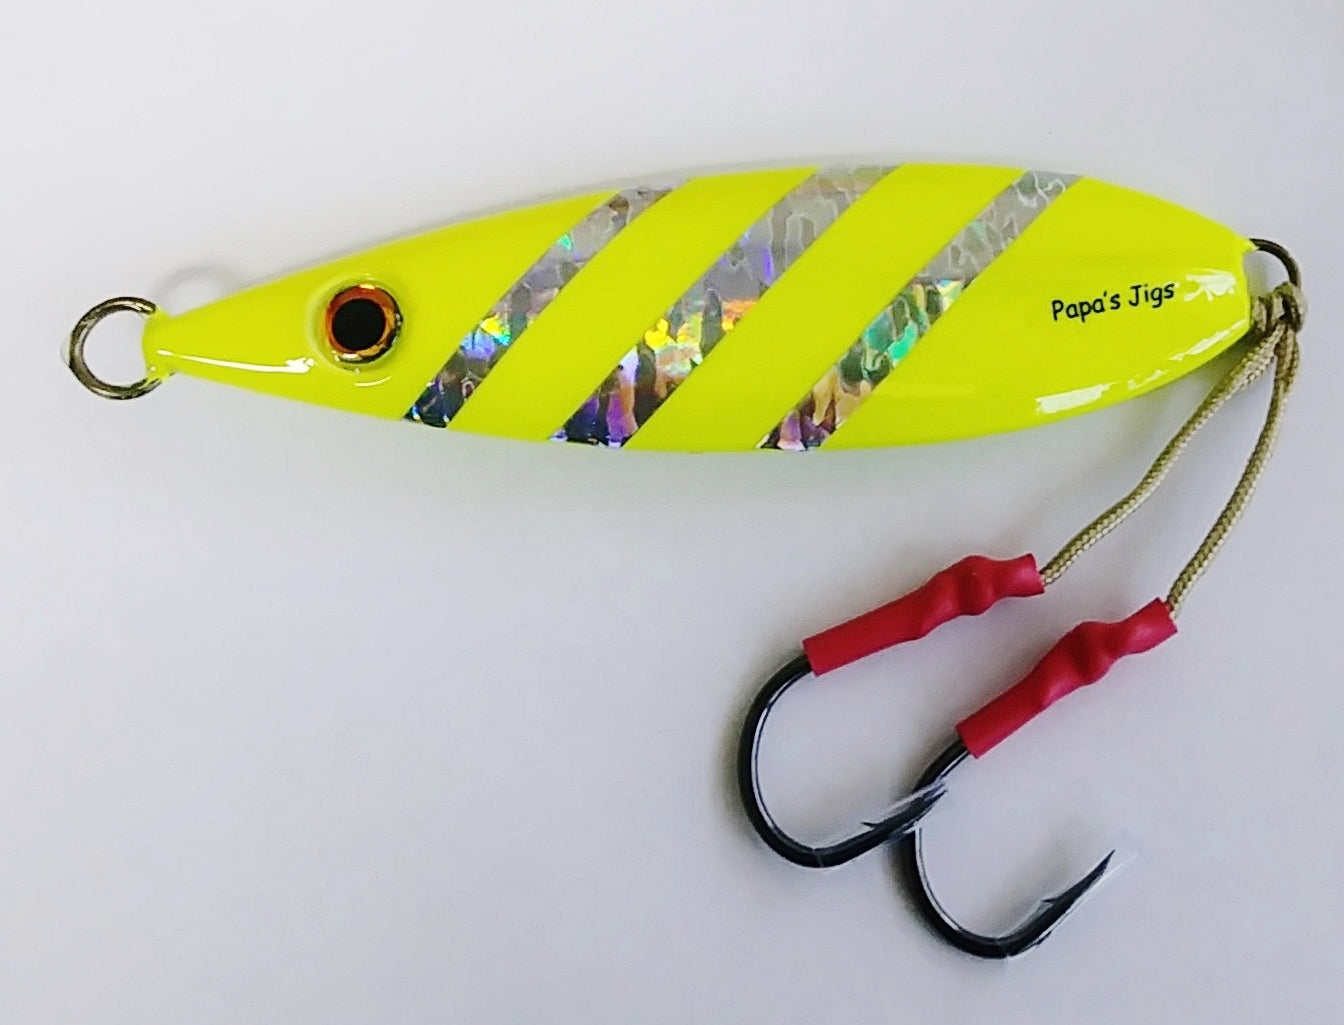 Fall bass fishing made easy. Just throw a fluke style bait like the pi